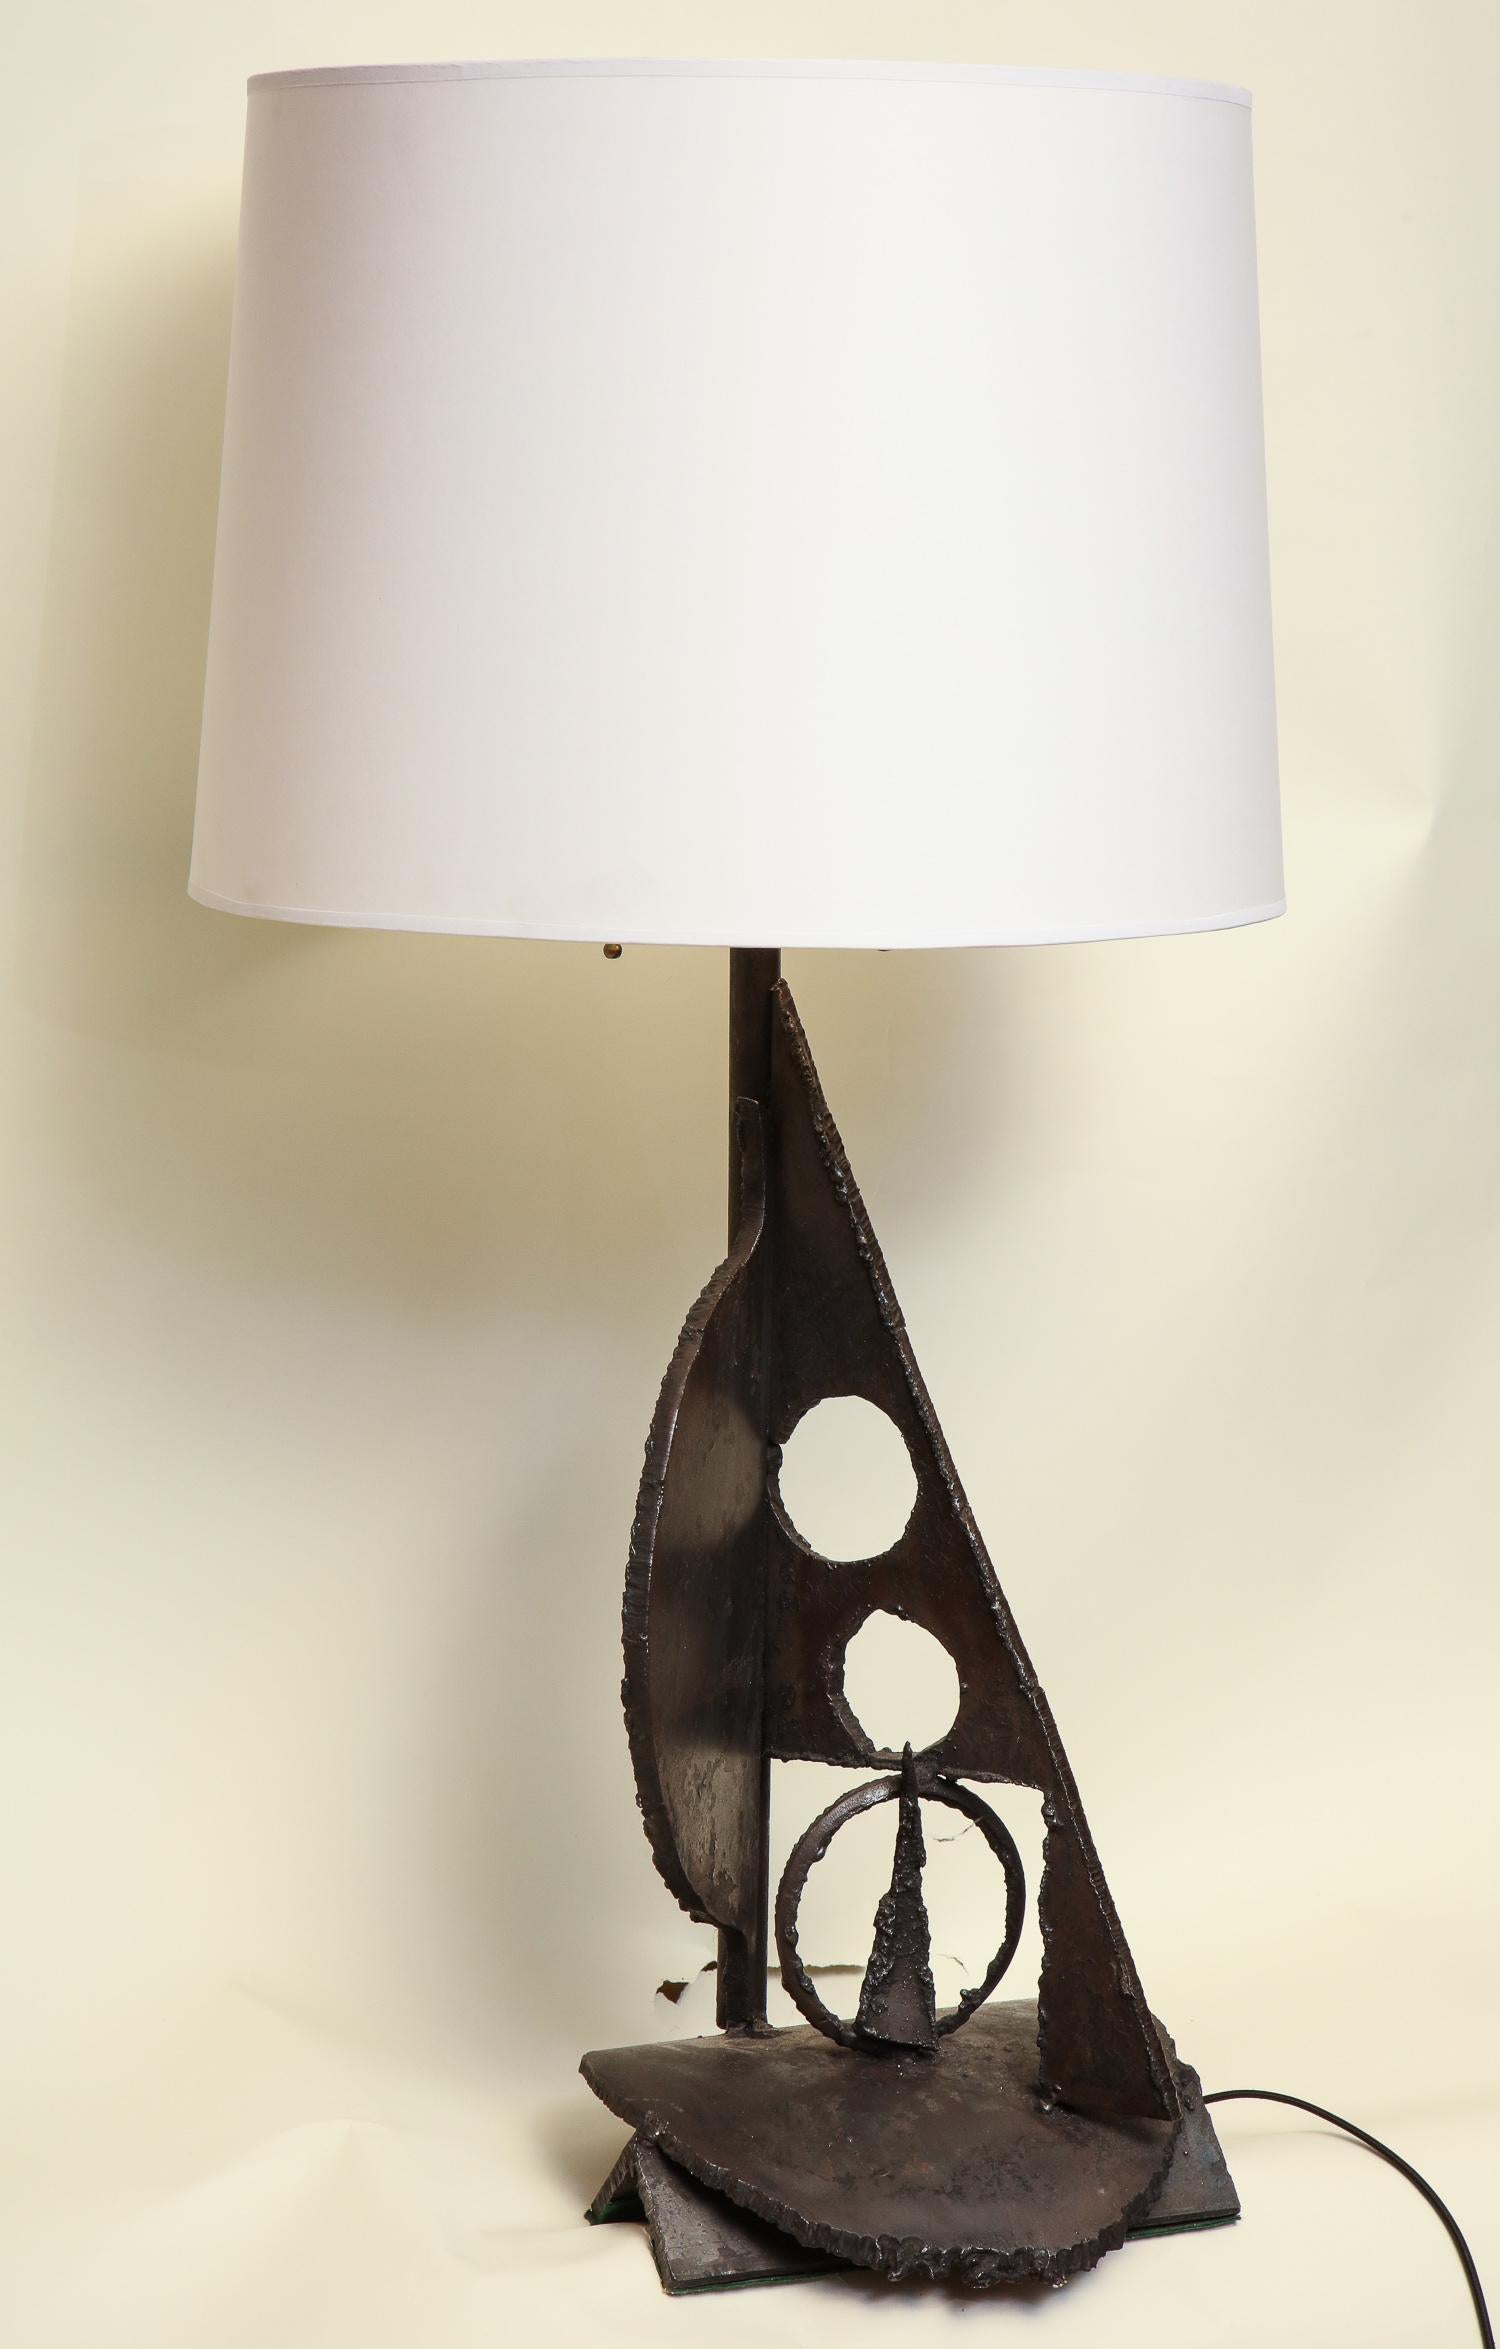 A Brutalist table lamp handcrafted iron Mid-Century Modern new sockets and rewired, American, 1960s.
Shade not included.